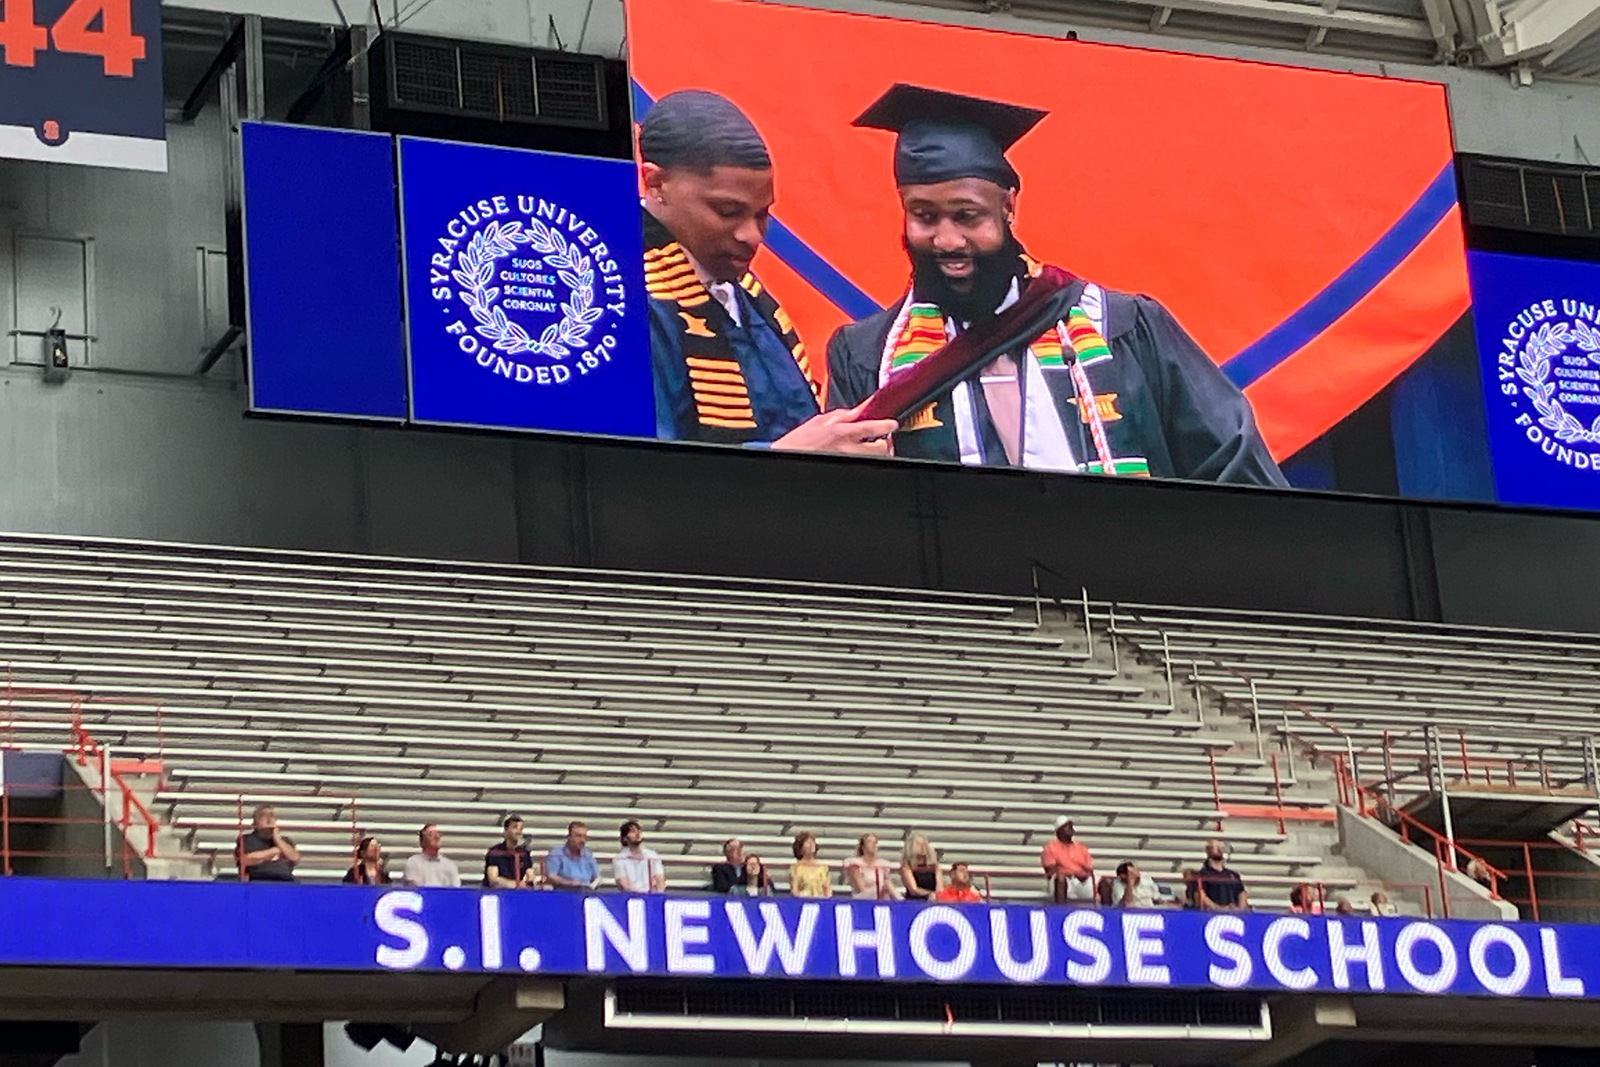 An image on a video board shows a graduate helping to adjust a fellow graduate's academic regalia